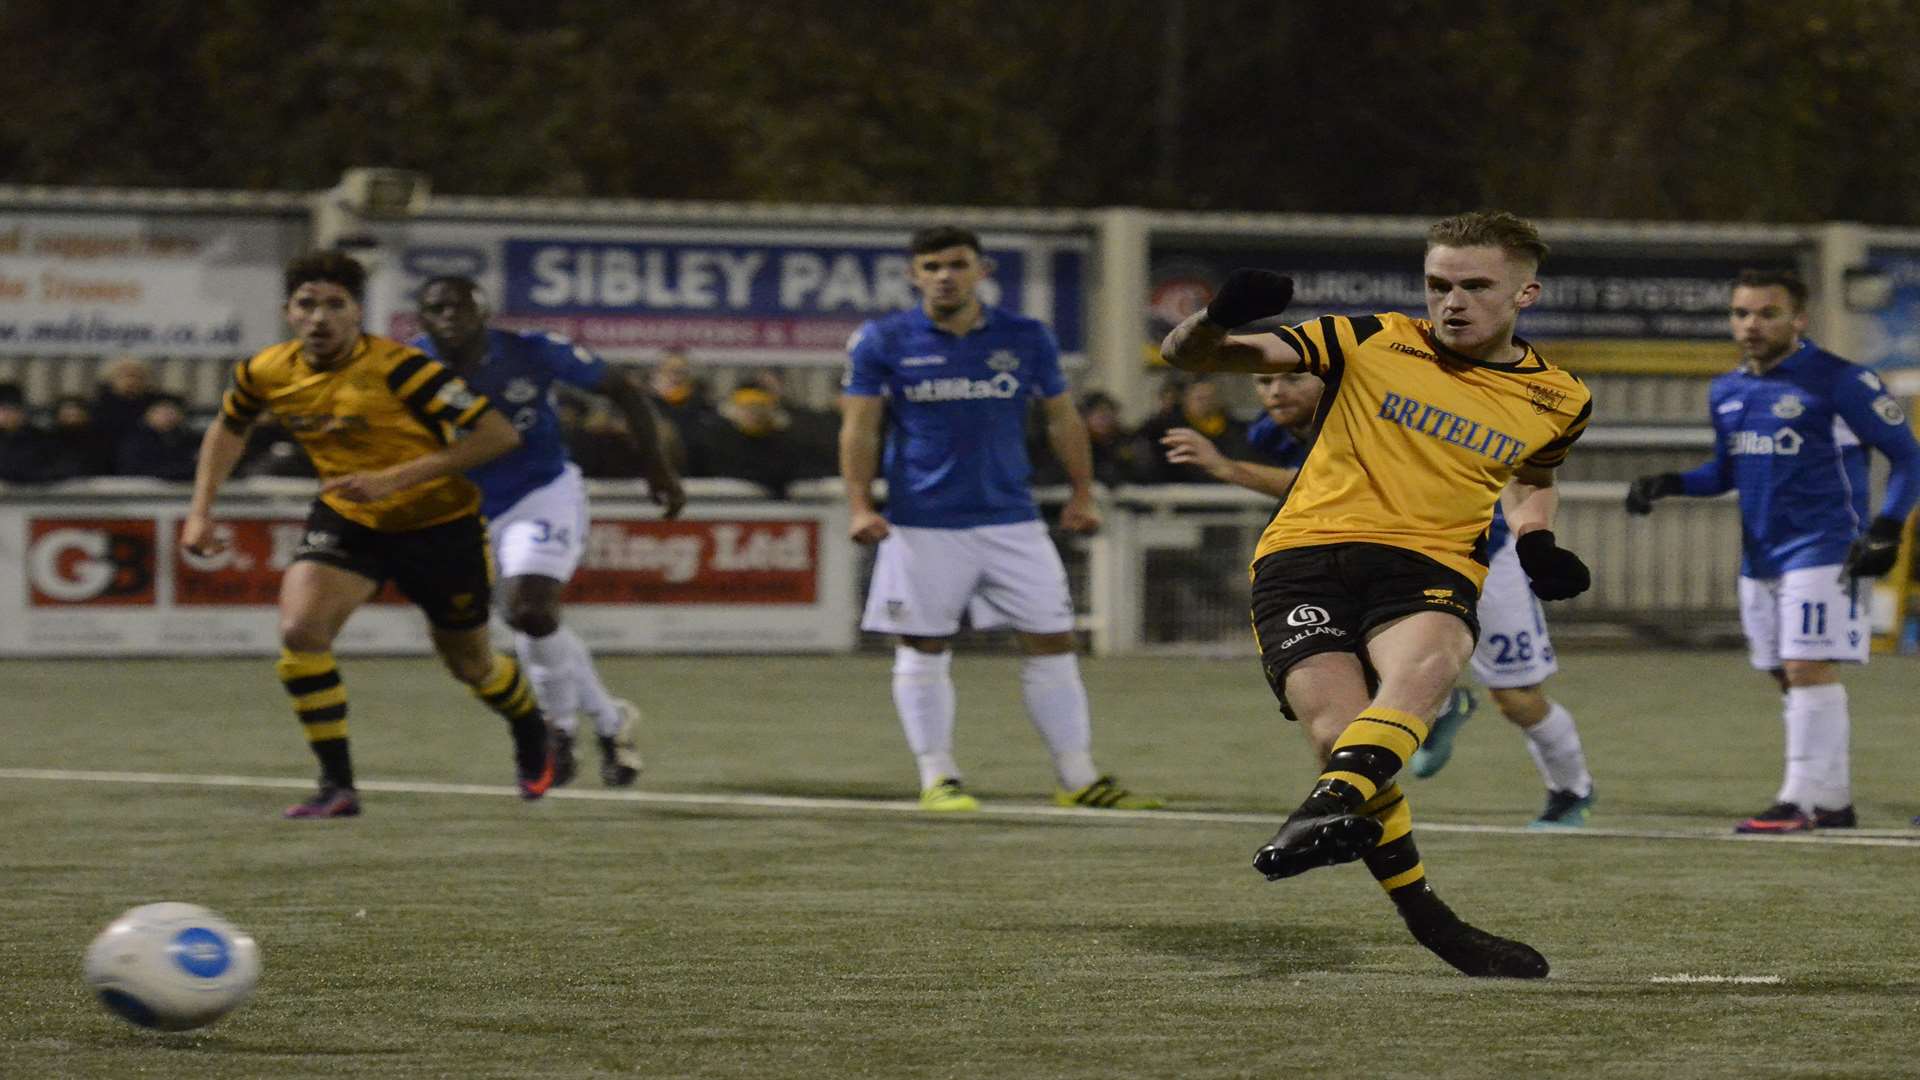 Bobby-Joe Taylor scores Maidstone's winner from the penalty spot Picture: Chris Davey